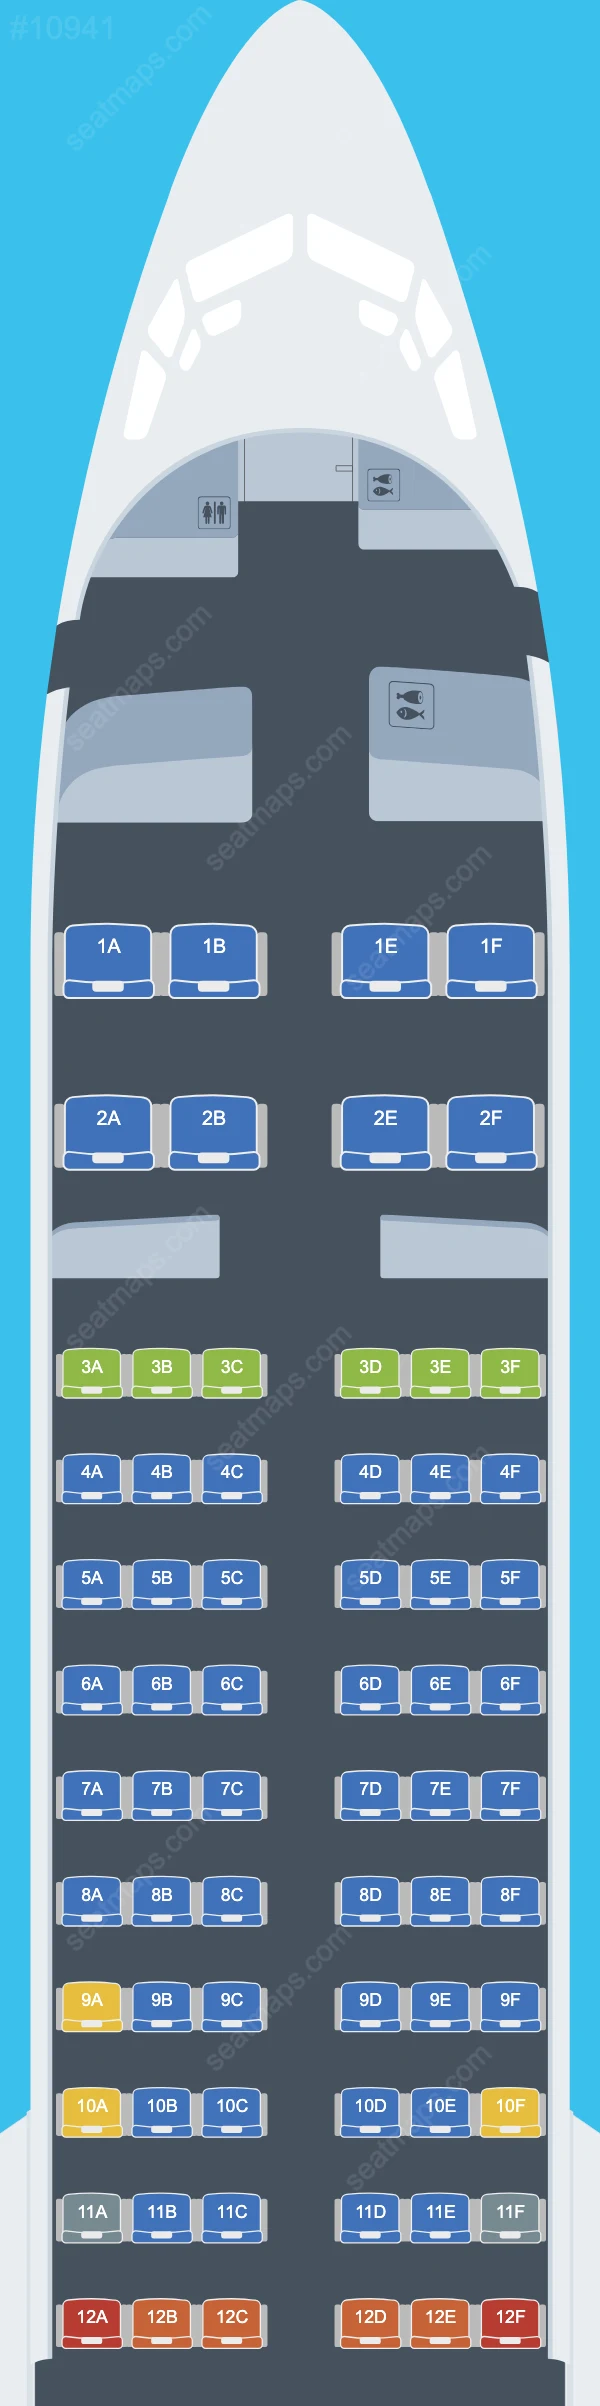 Turkish Airlines Boeing 737 MAX 8 Seat Maps 737 MAX 8 V.2